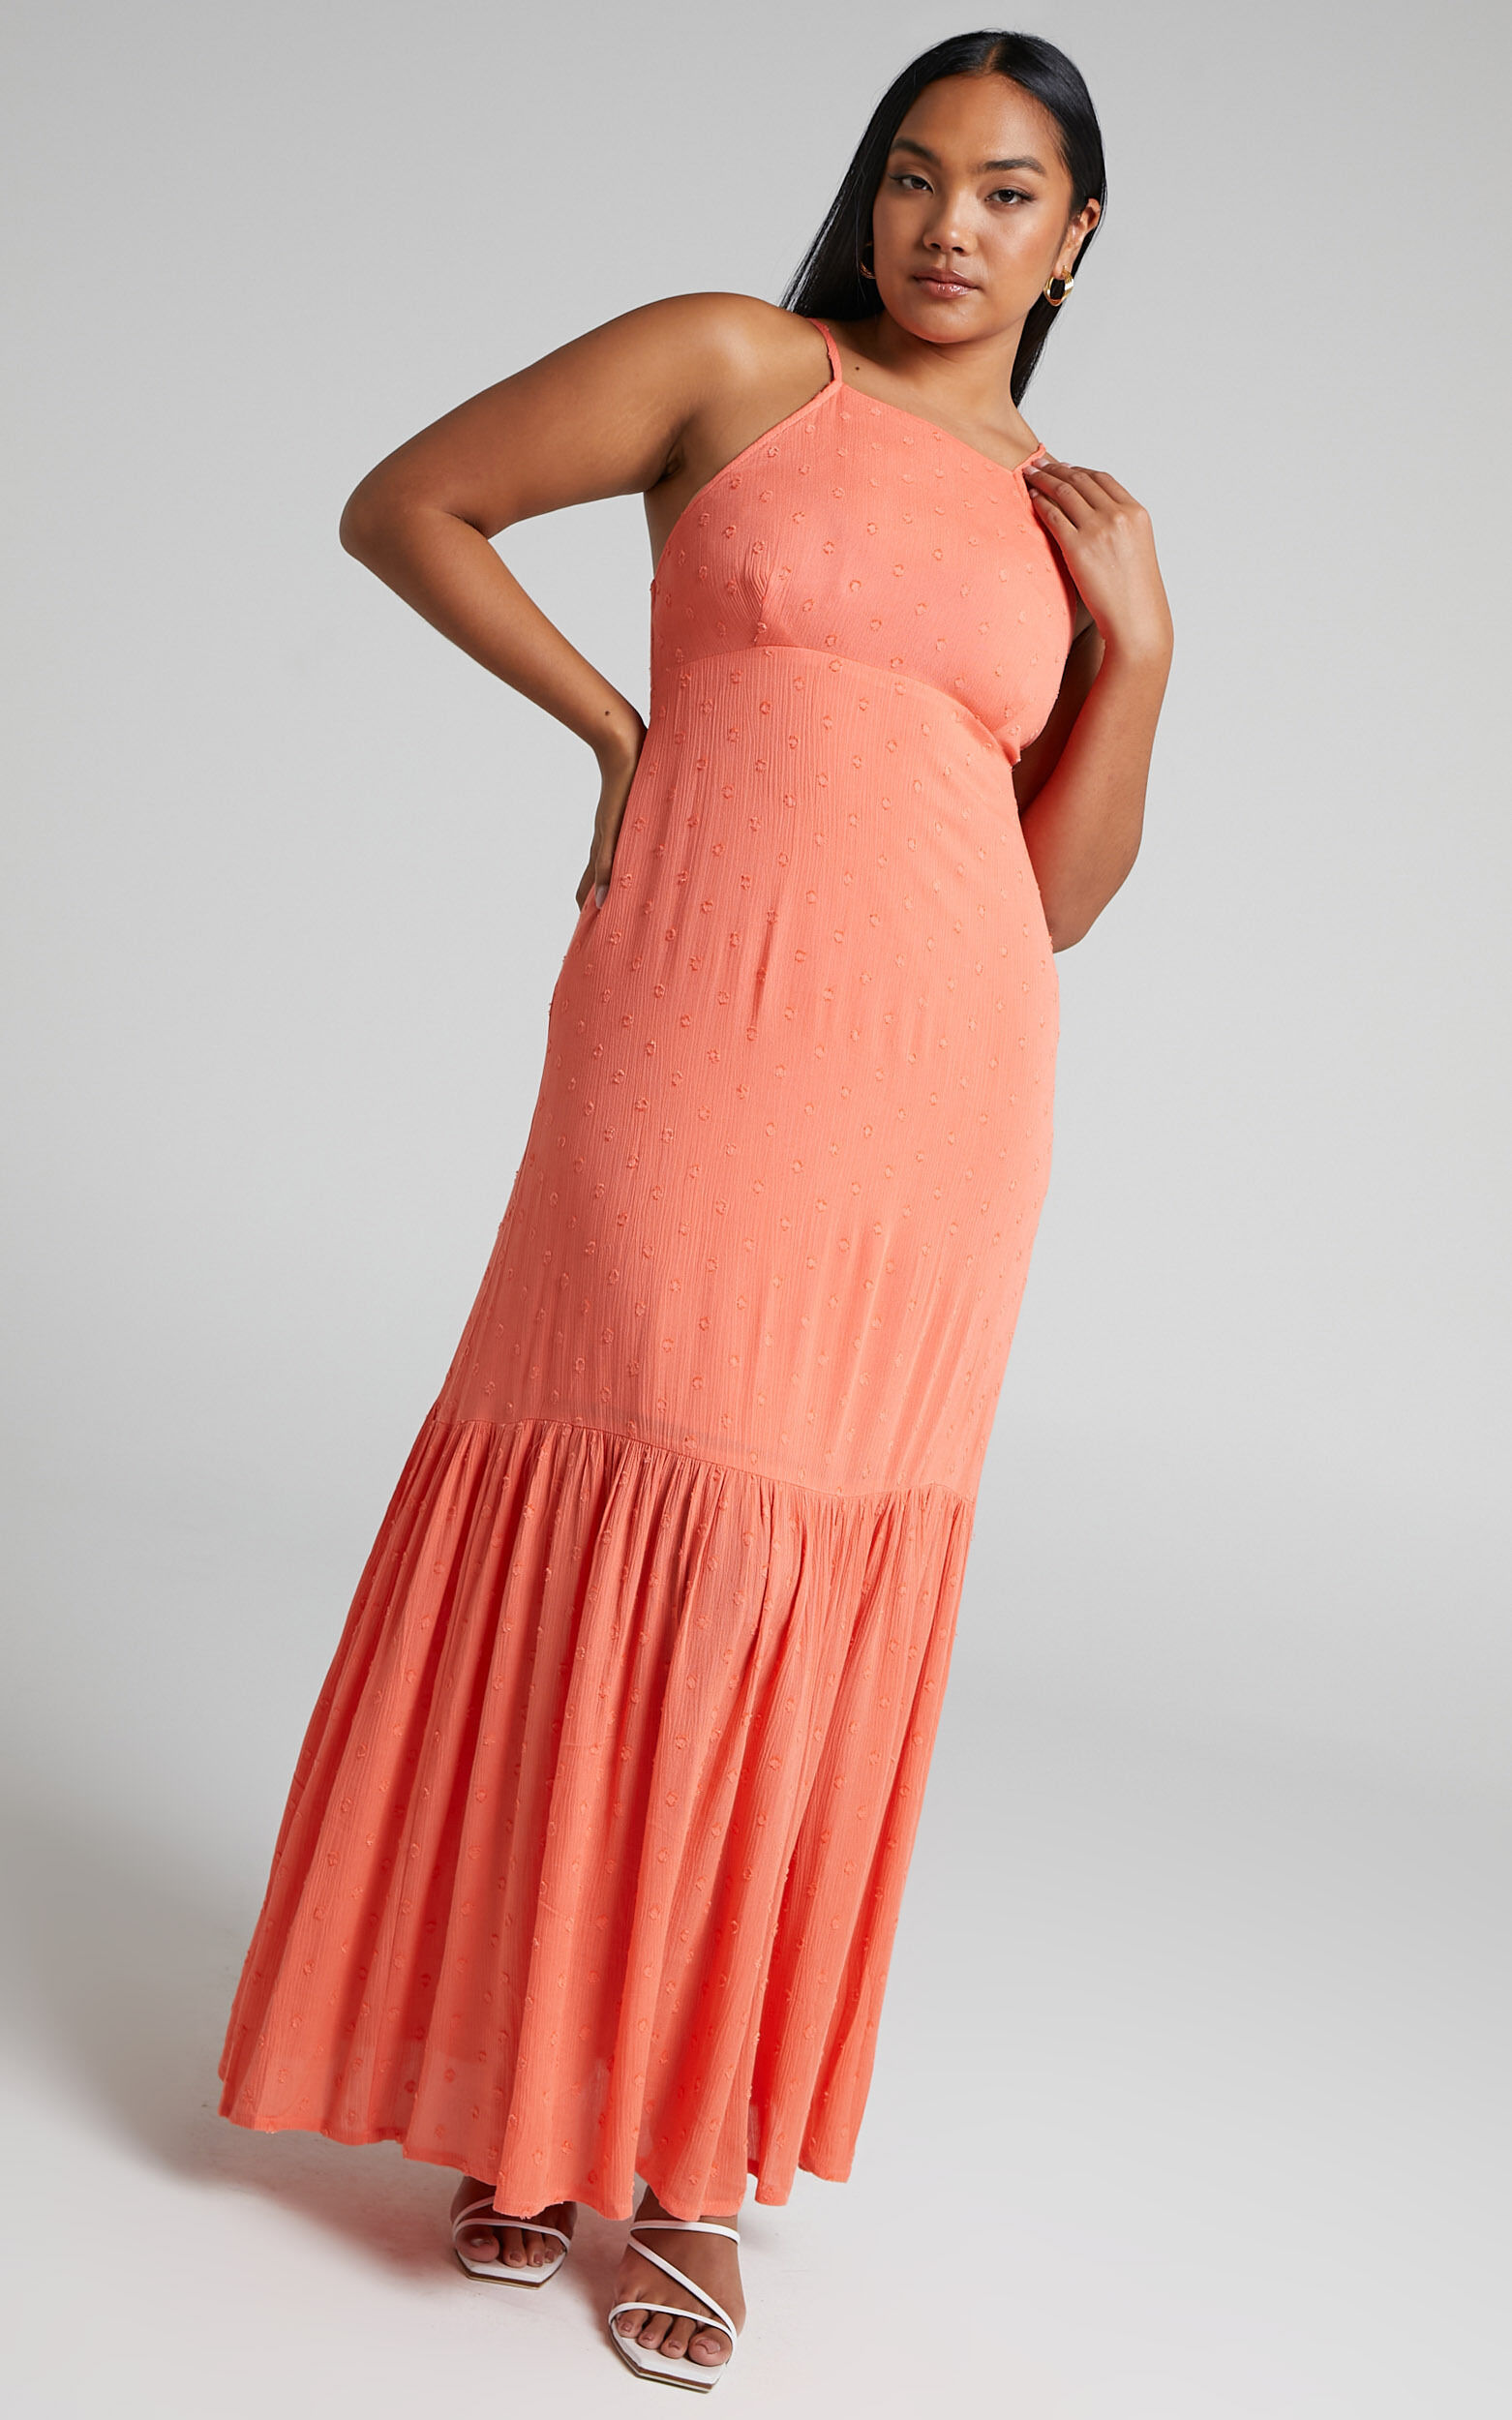 Cariele Strappy Tiered Dotted Maxi Dress in Coral - 06, PNK2, super-hi-res image number null